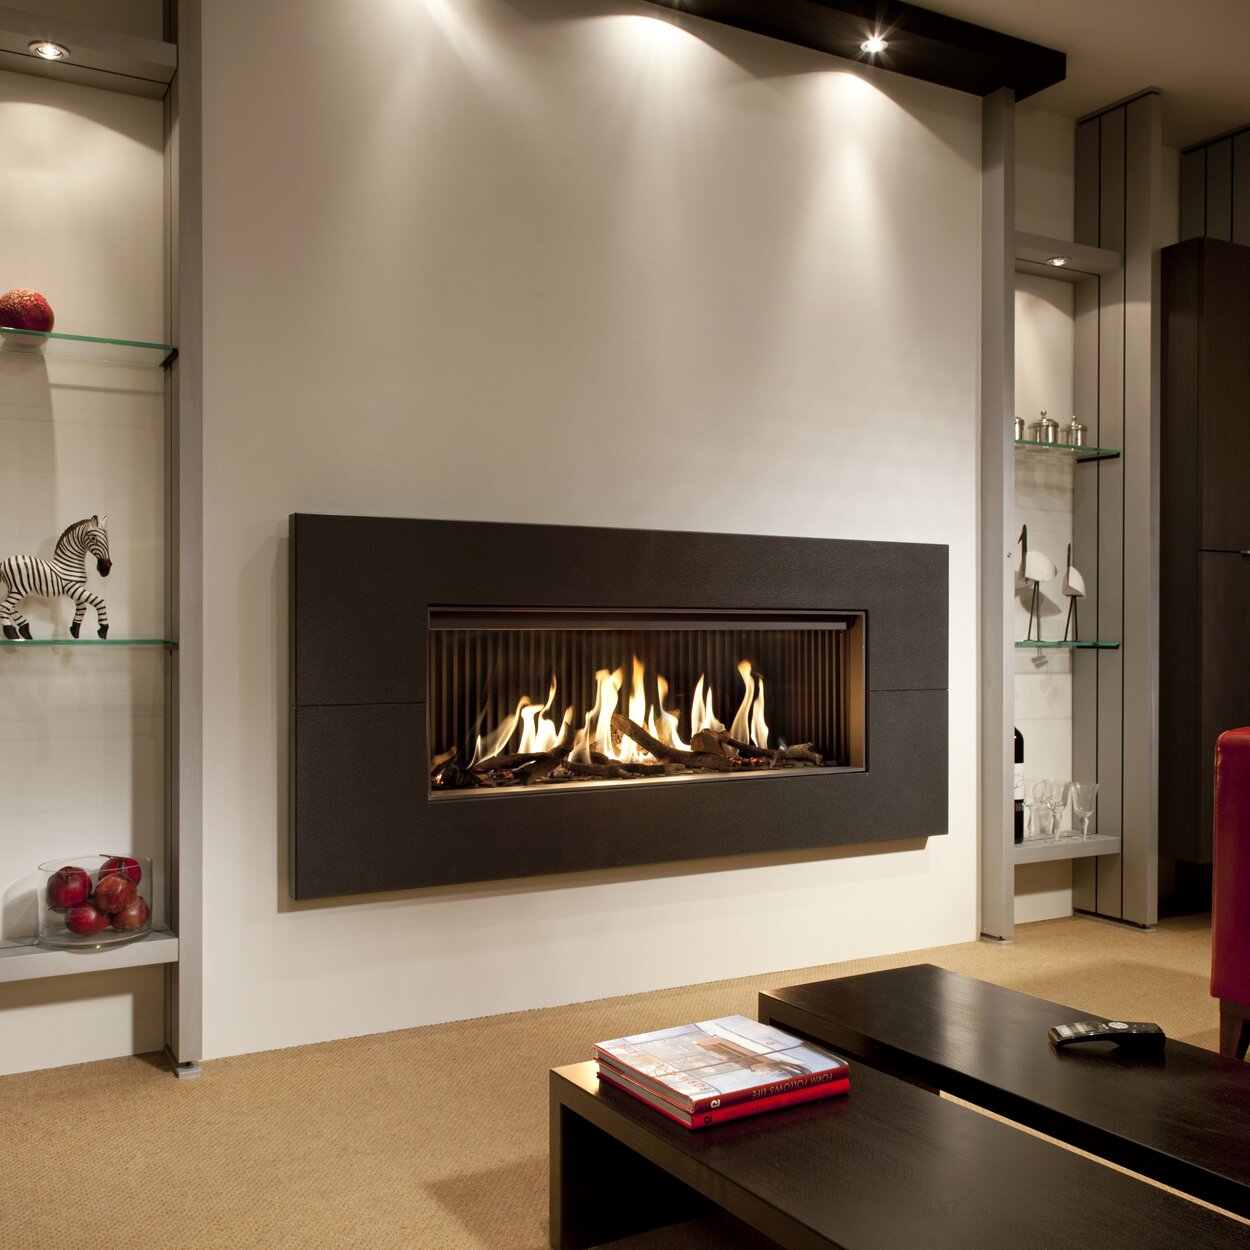 Gas fireplace G120/41F with black frame on a light-coloured wall installed in the living room with red accents